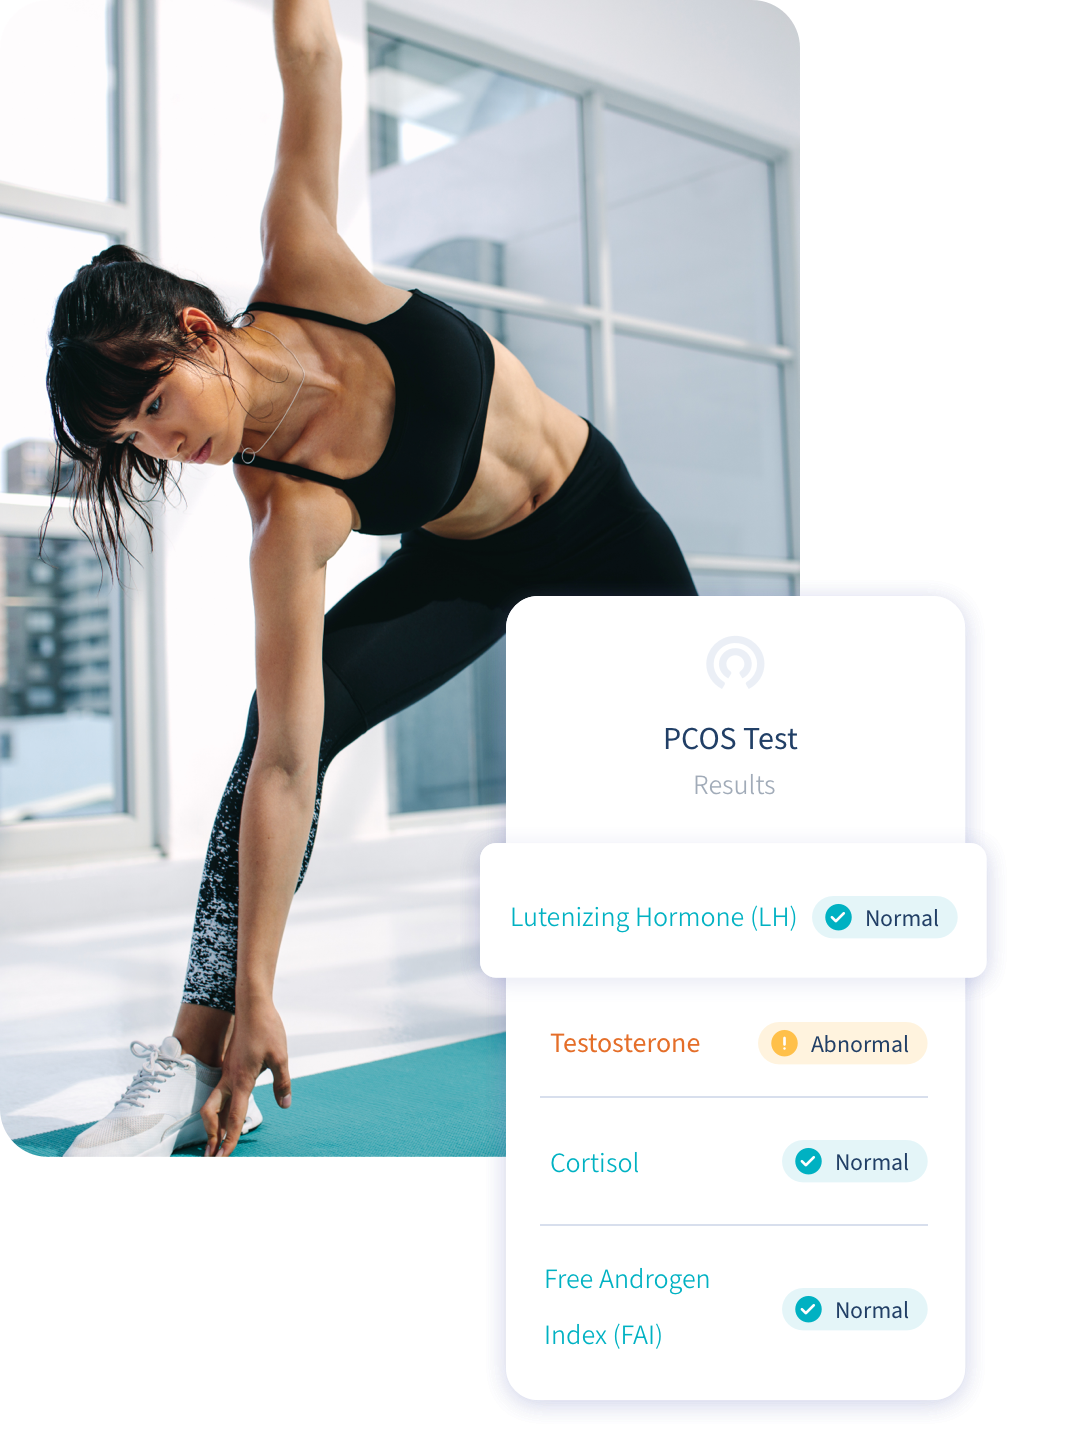 Woman doing yoga - PCOS results screen inset